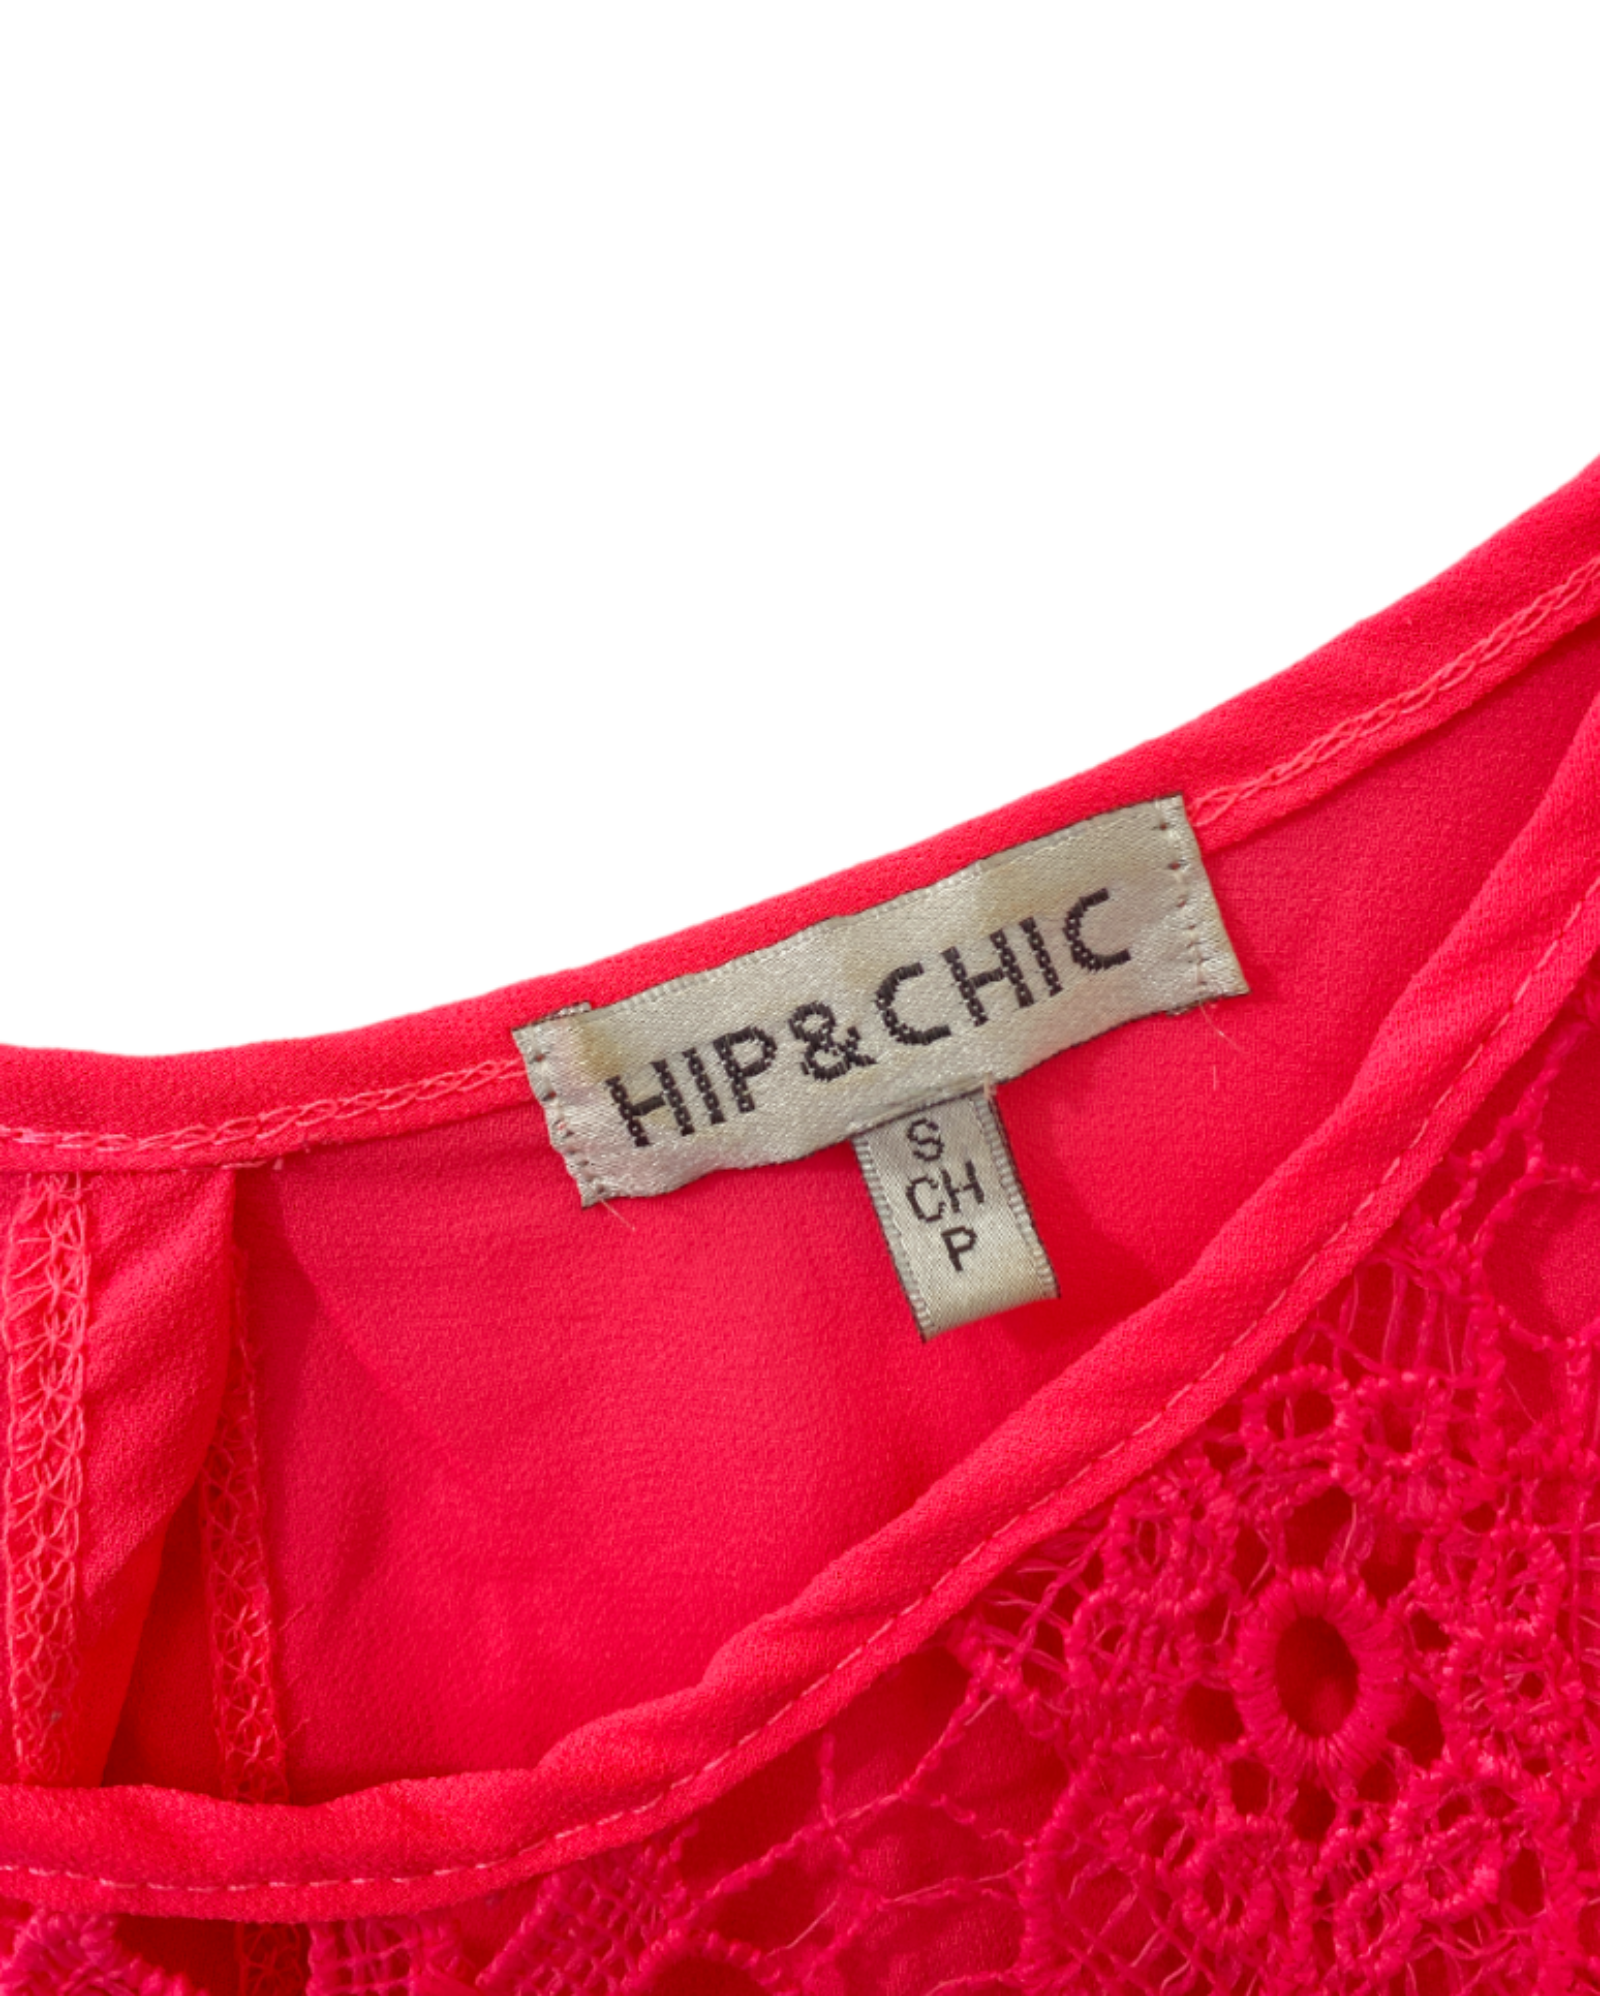 Blusas Casuales Hip & chic